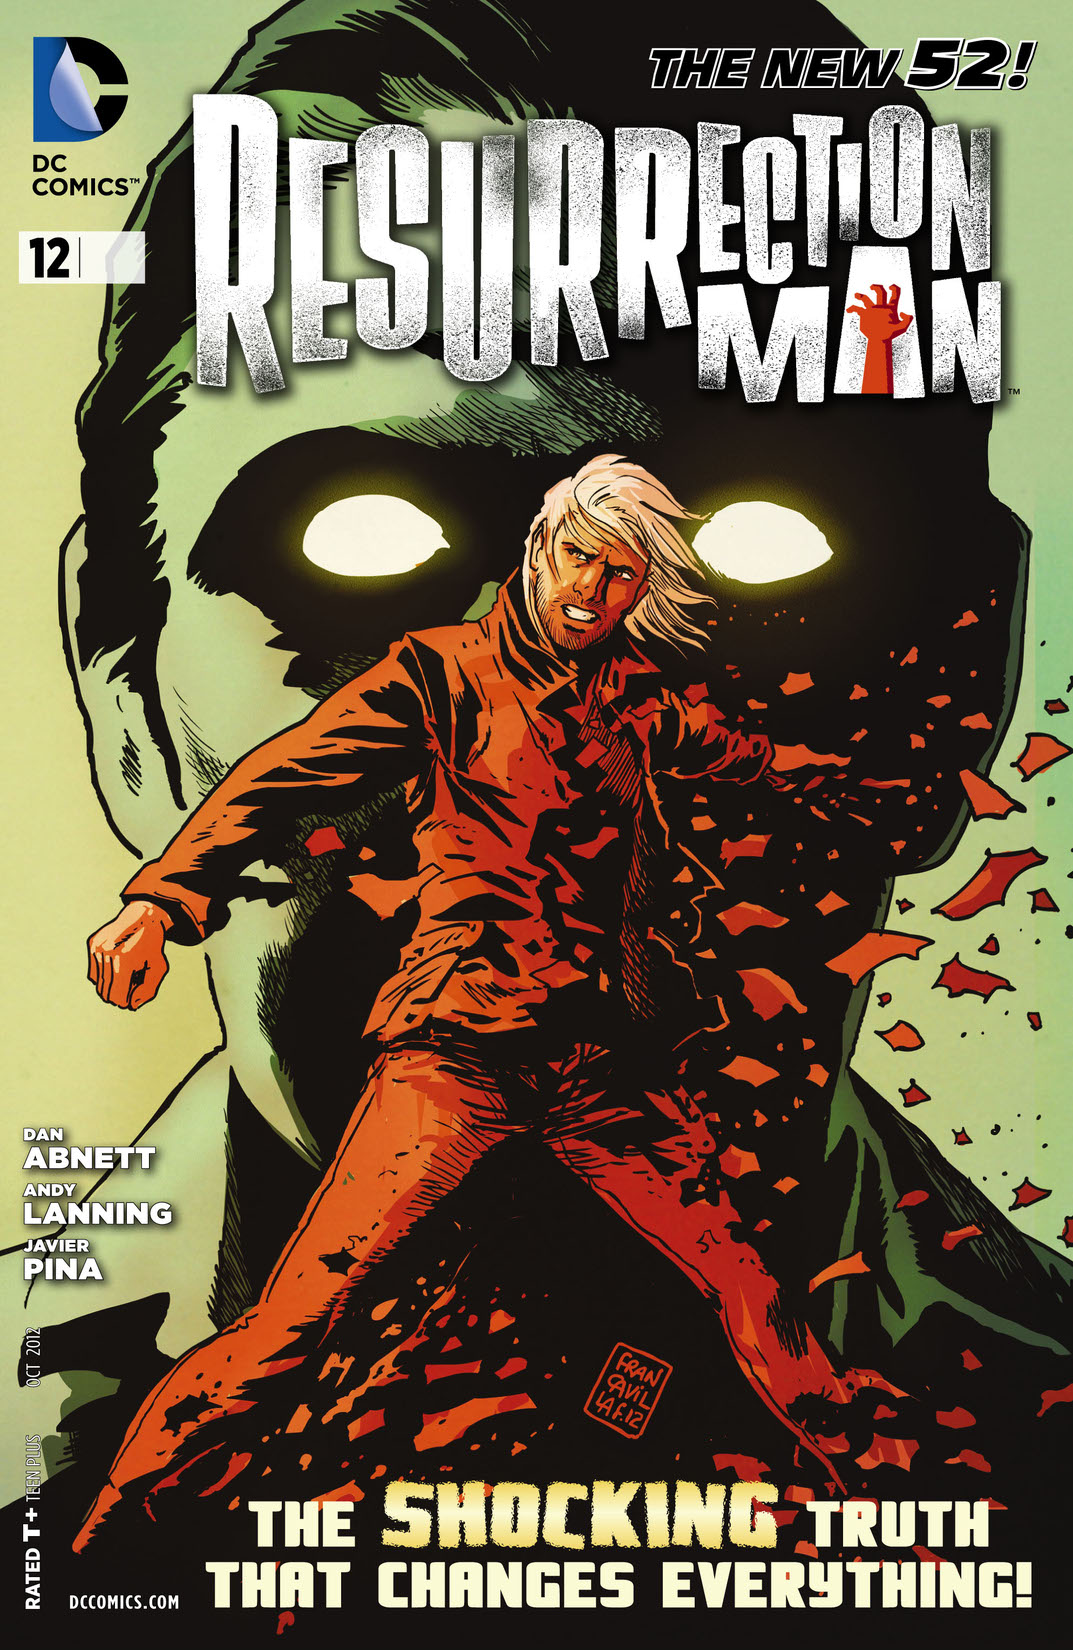 Resurrection Man (2011-) #12 preview images